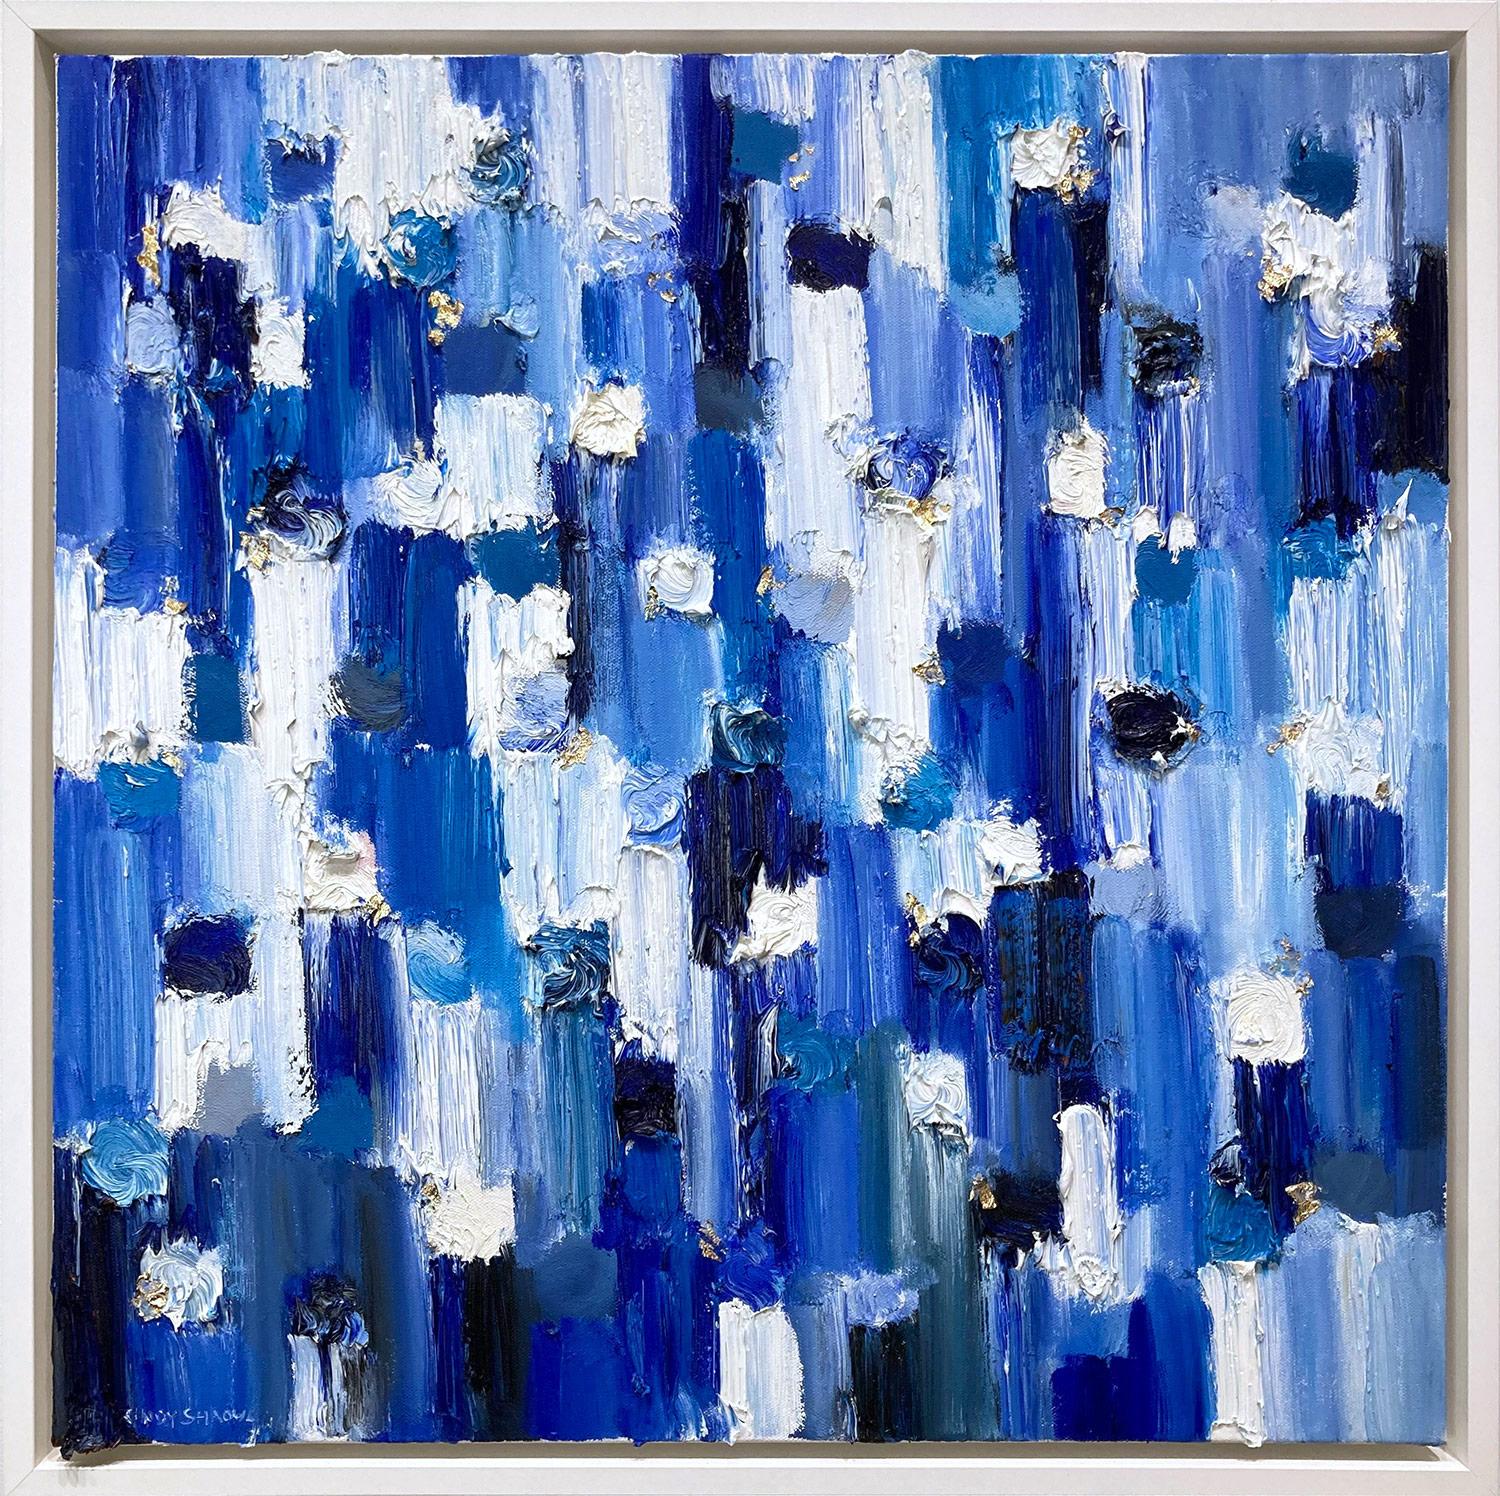 Cindy Shaoul Abstract Painting - "Dripping Dots - London" Blue and White Abstract Oil Painting on Canvas Framed